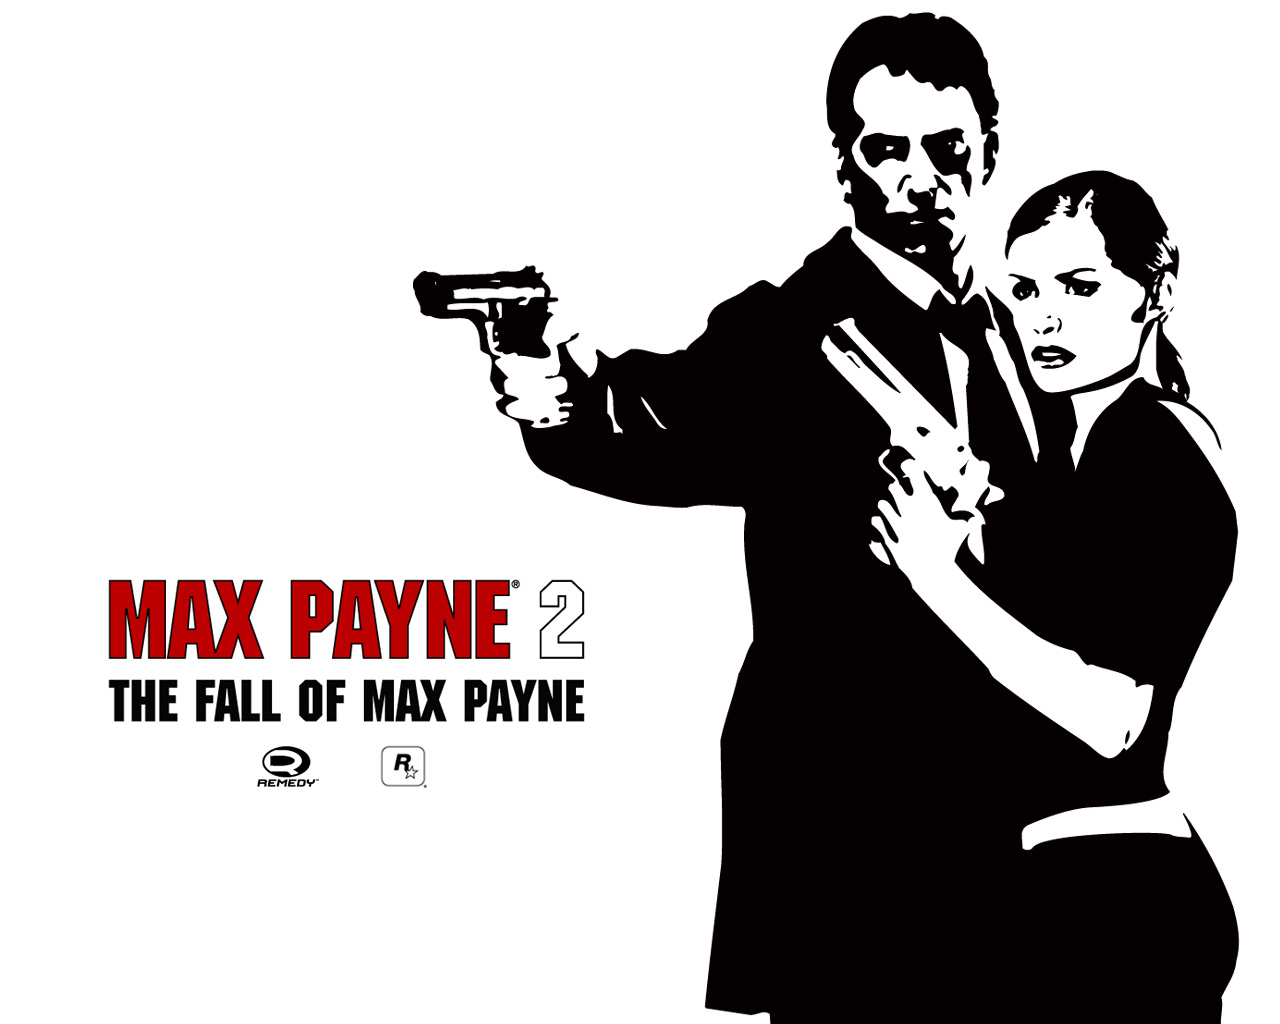 Max Payne 2: The Fall of Max Payne (2003) promotional art